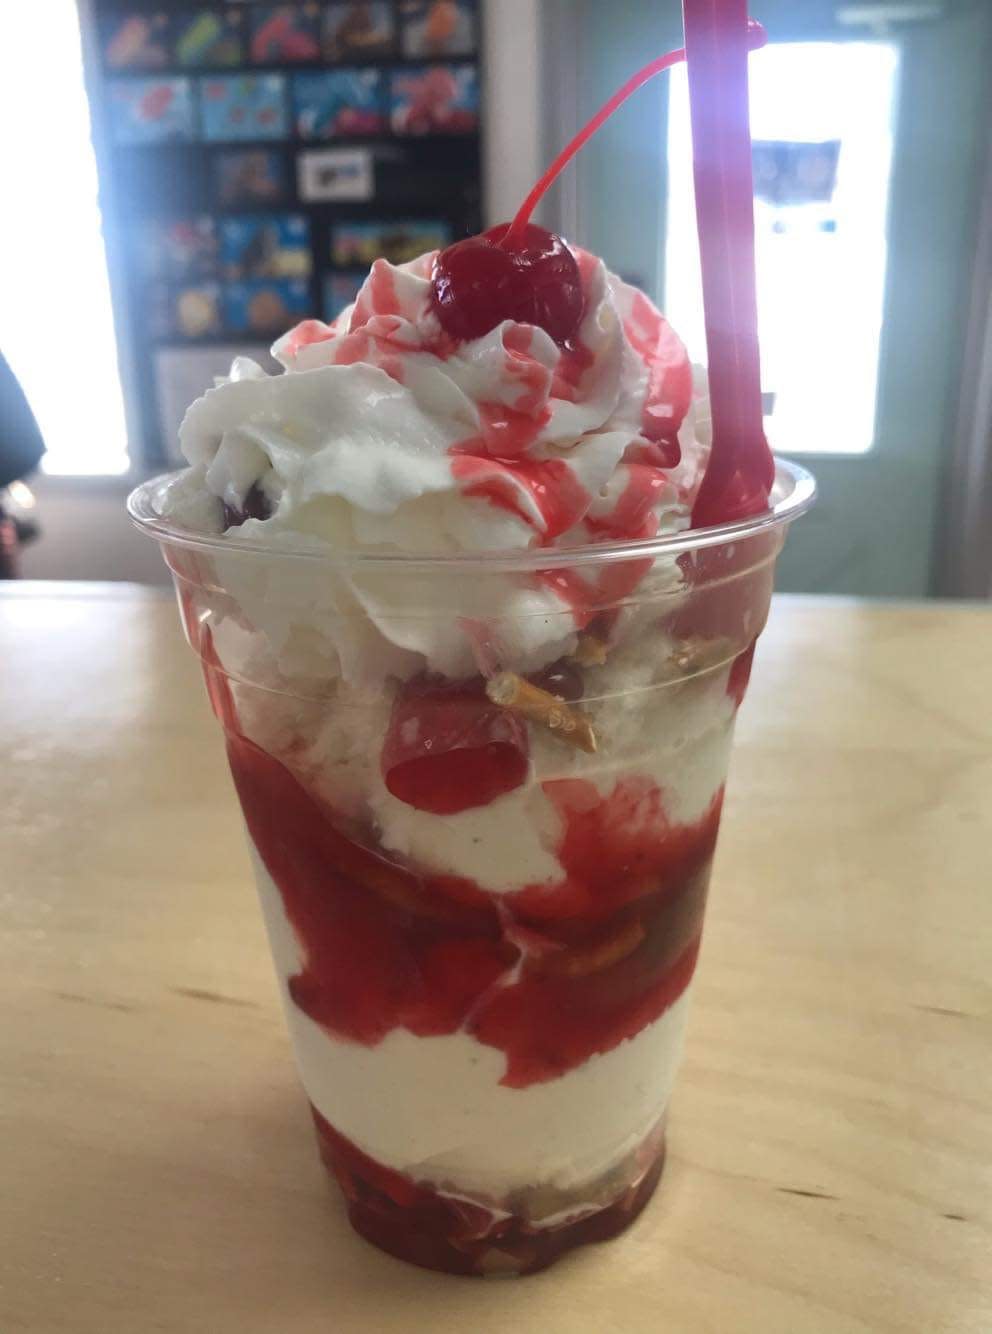 Judy's Jimmies in Patterson Township has plenty of ice cream treats like this.